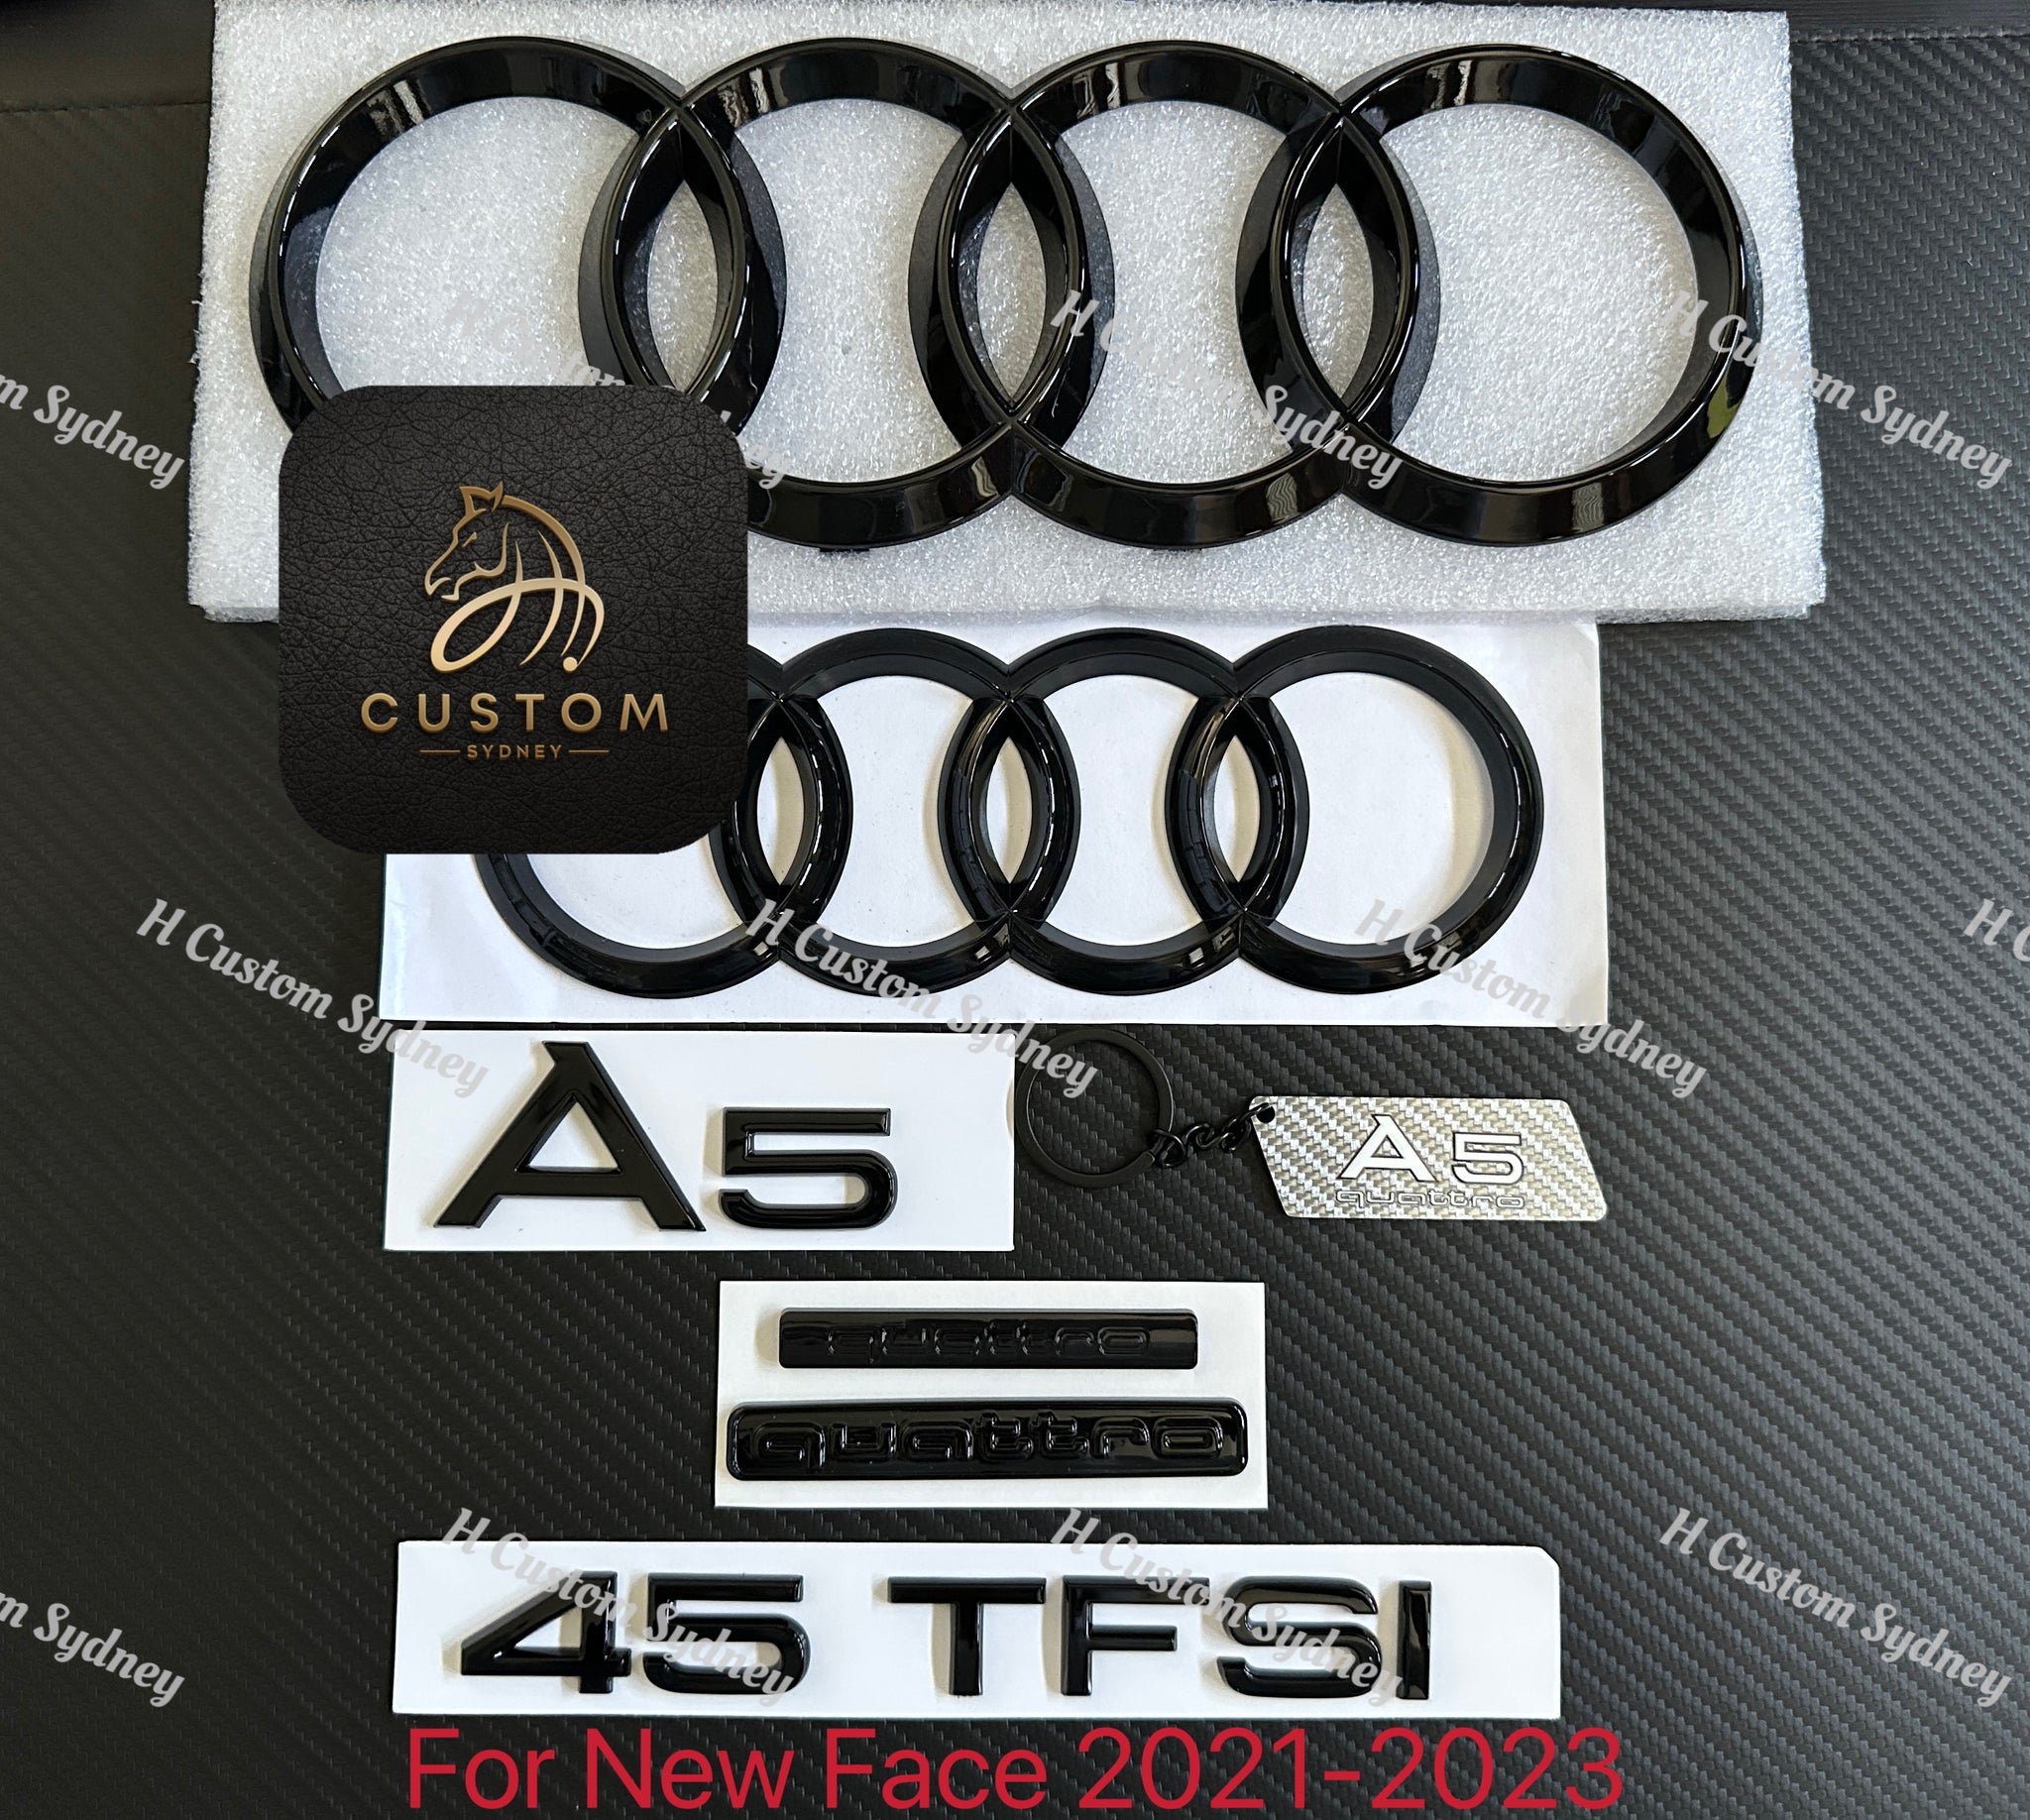 Audi Gloss Black Front and Rear Rings. Audi Front & Rear -  New Zealand